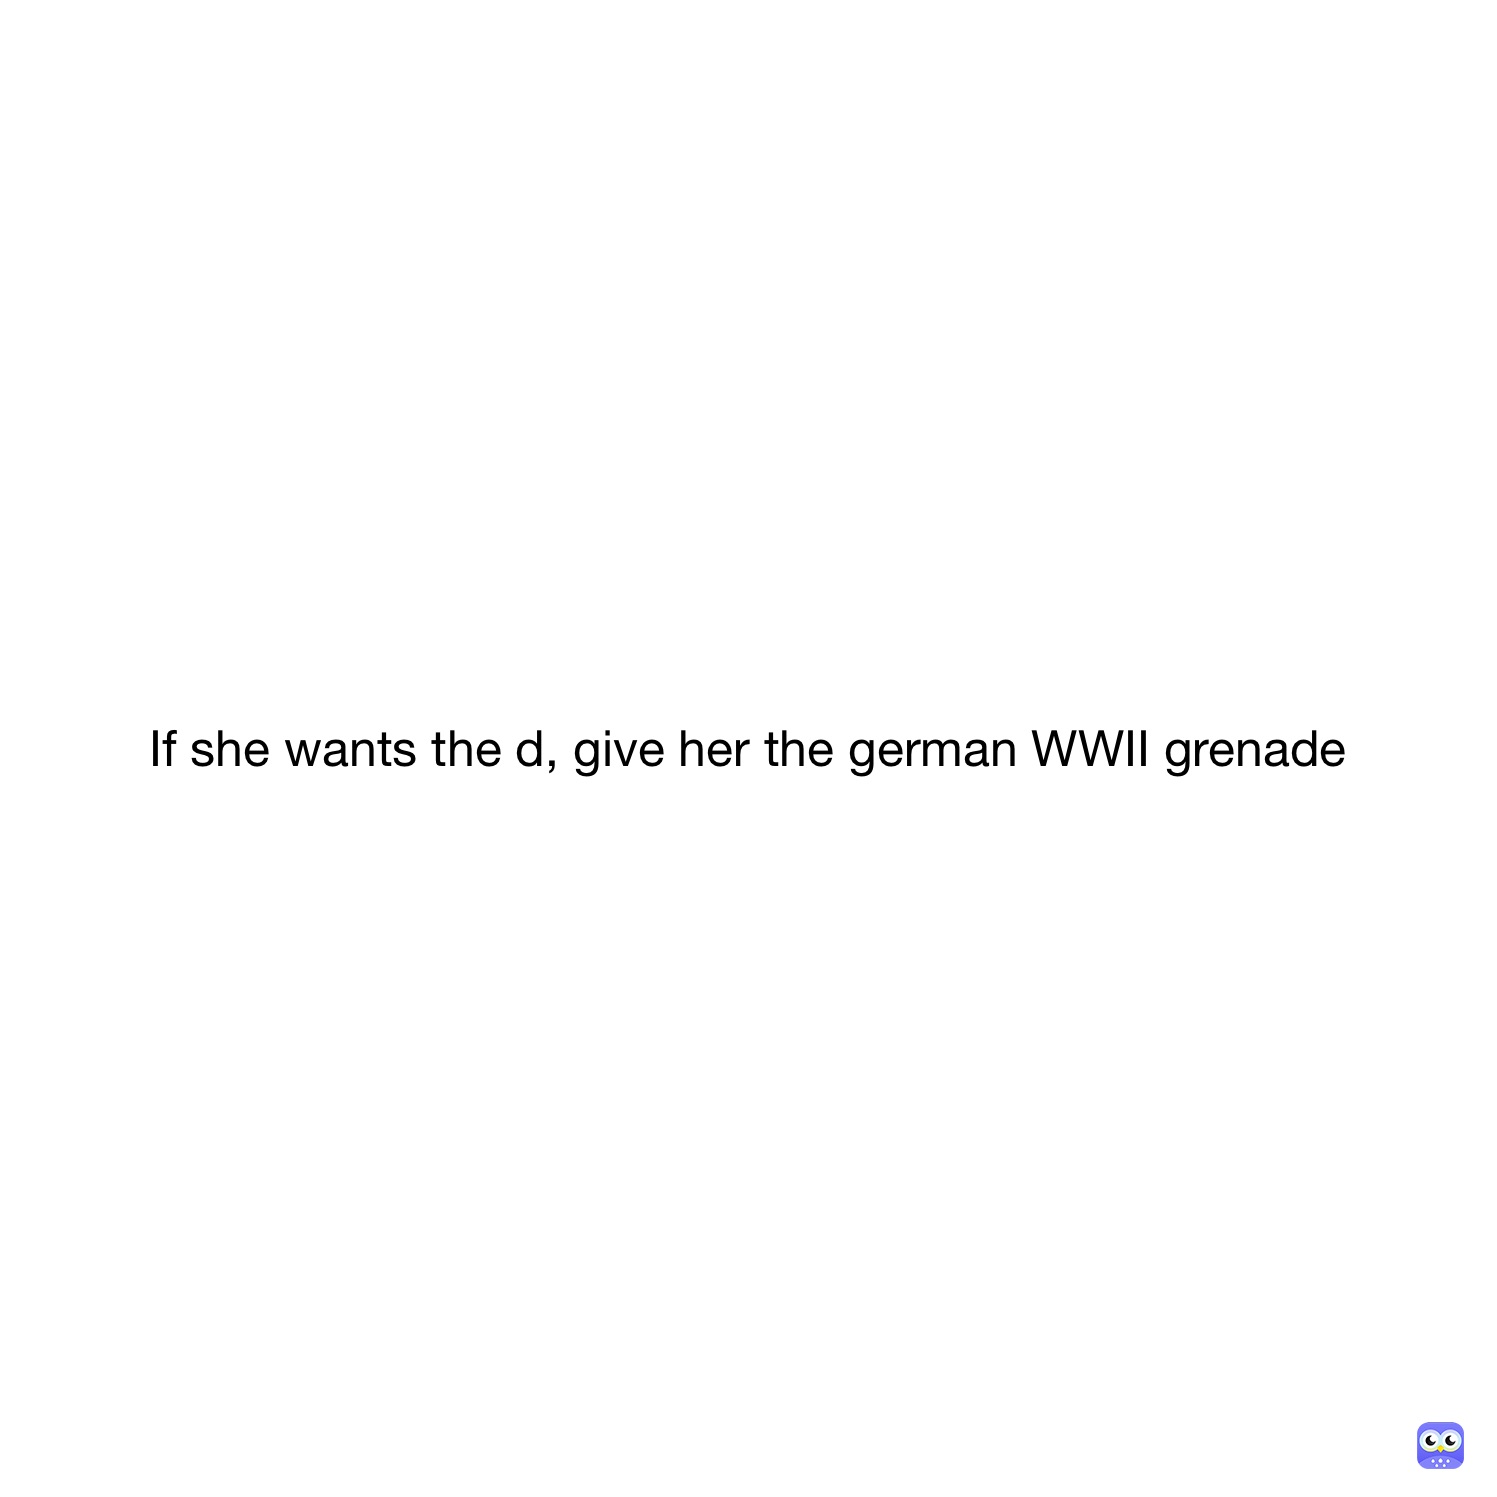 If she wants the d, give her the german WWII grenade